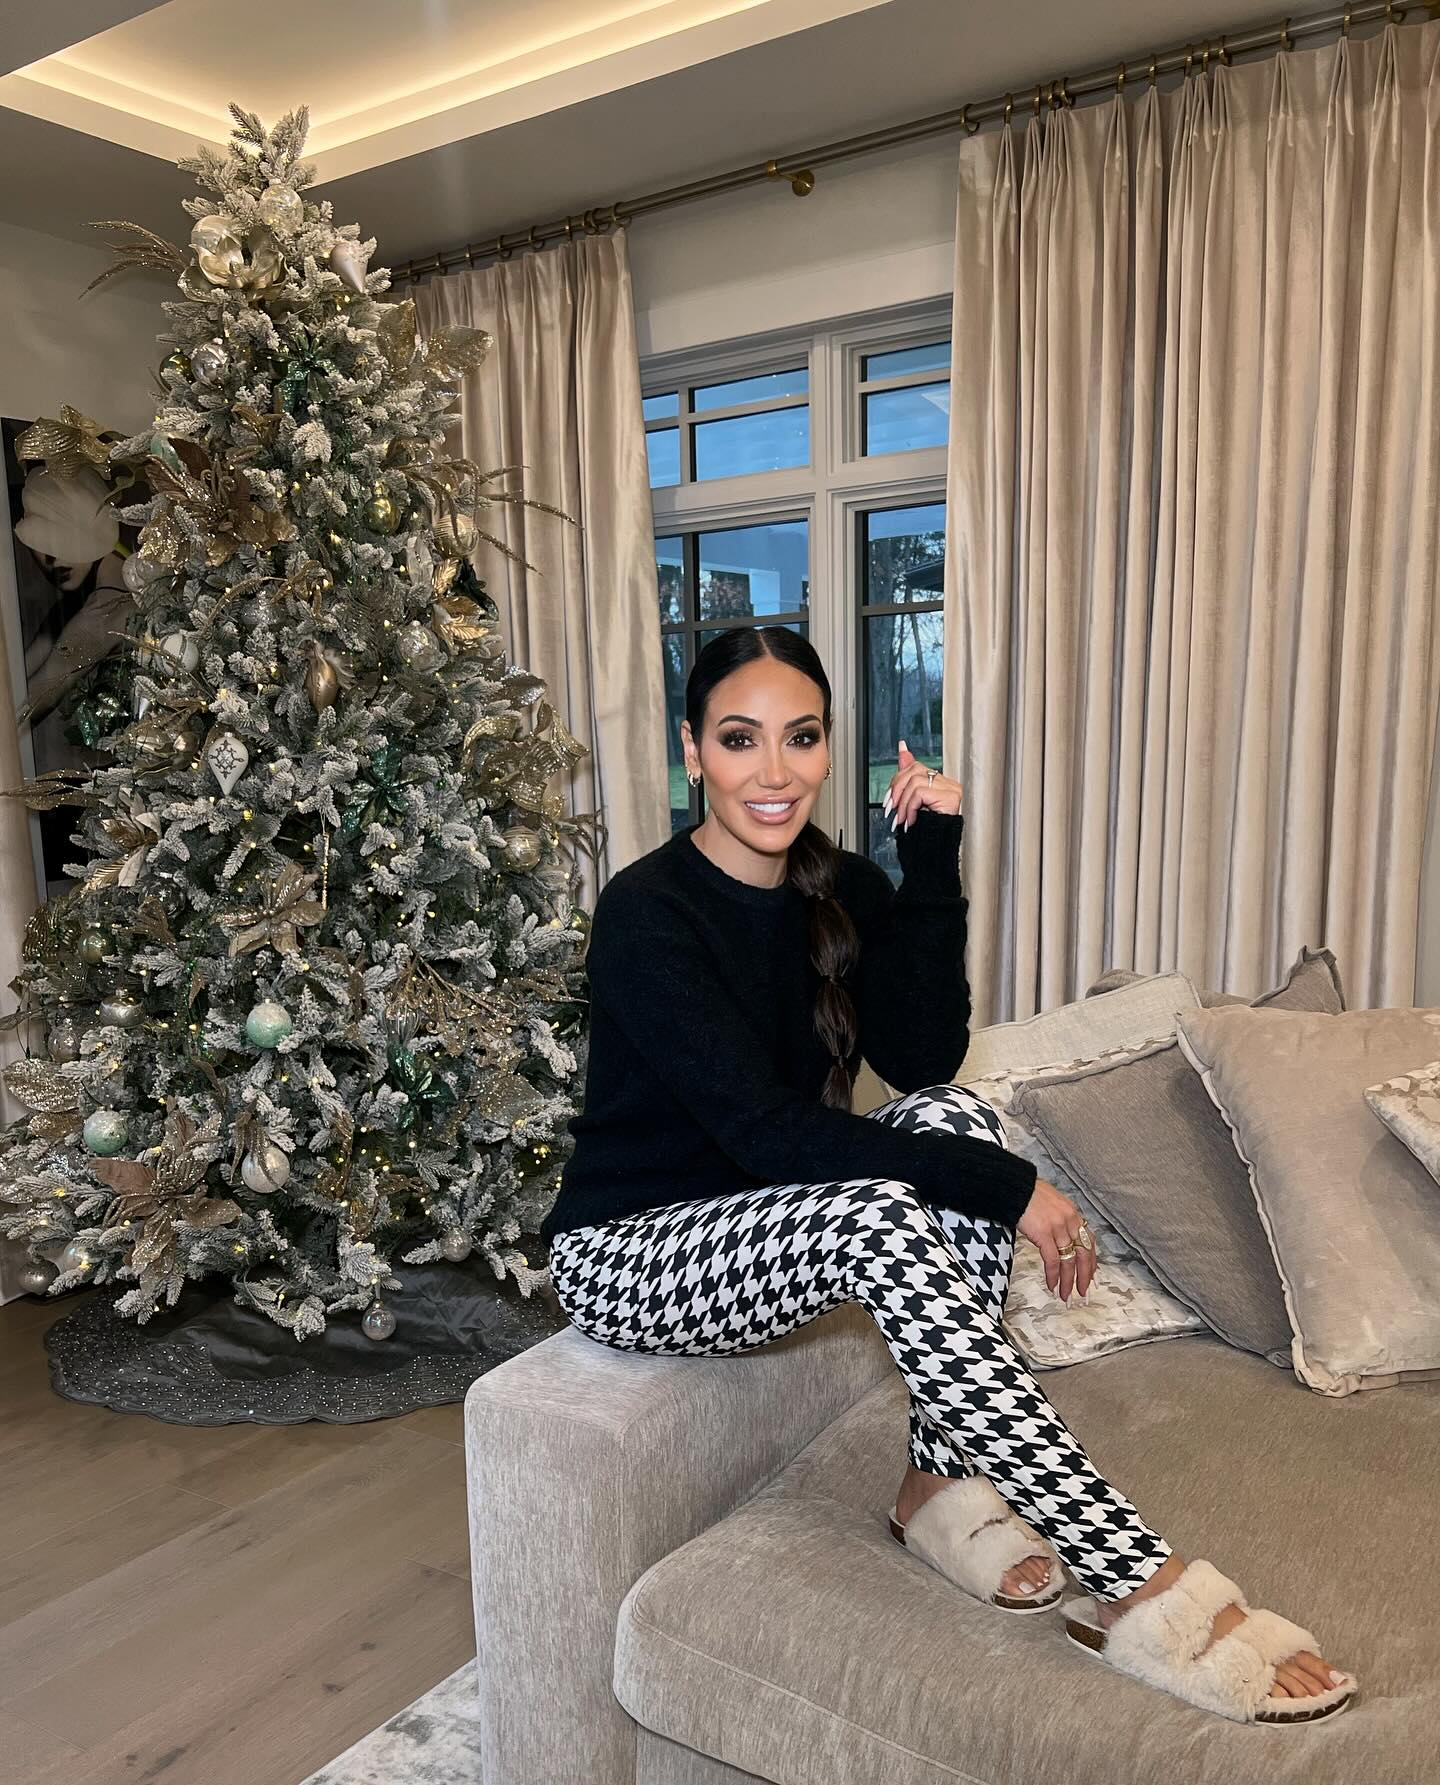 Melissa posed in front of her silver Christmas tree wearing cozy leggings